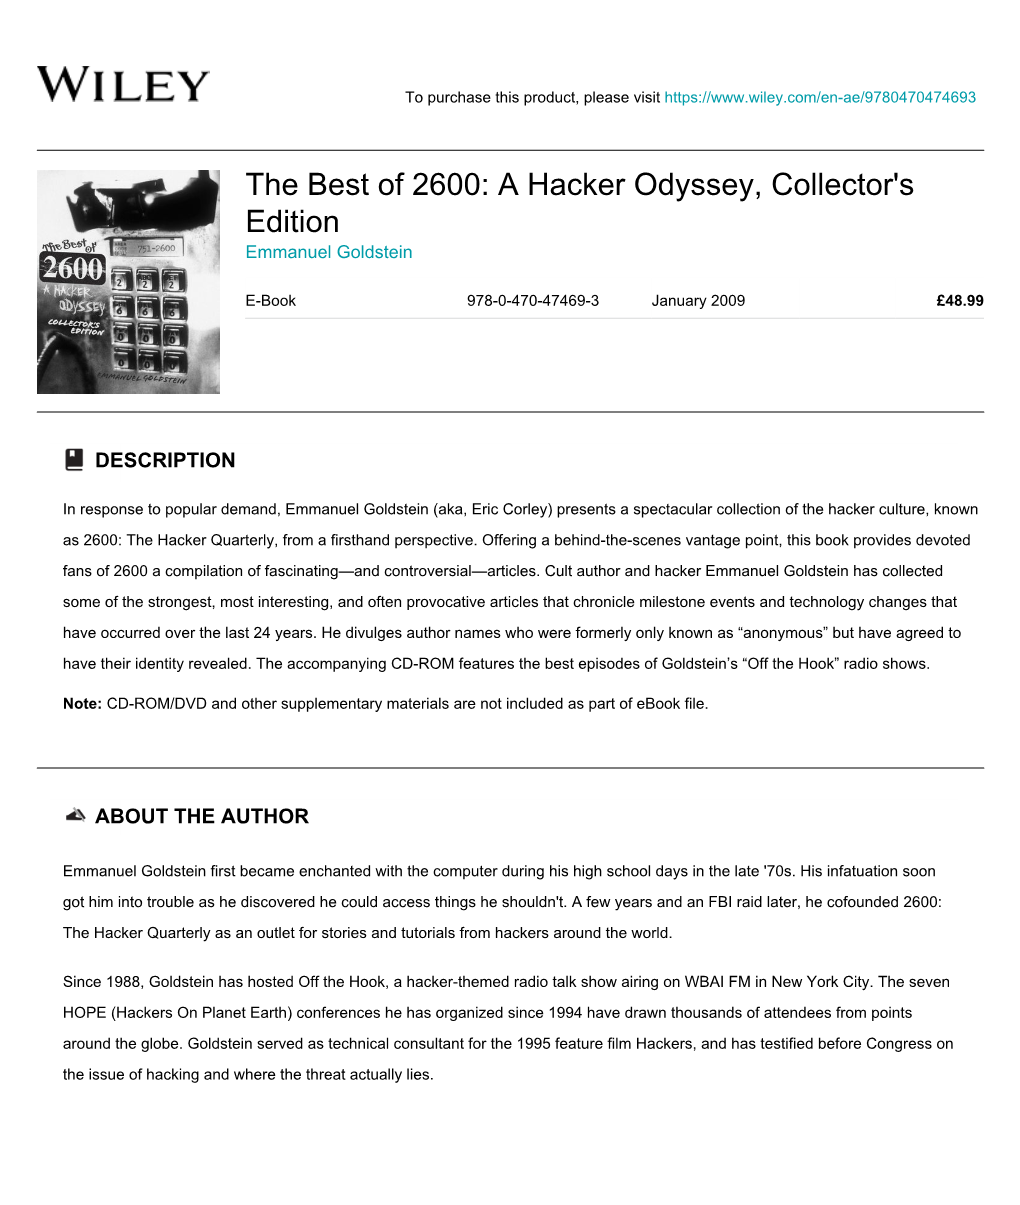 The Best of 2600: a Hacker Odyssey, Collector's Edition Emmanuel Goldstein